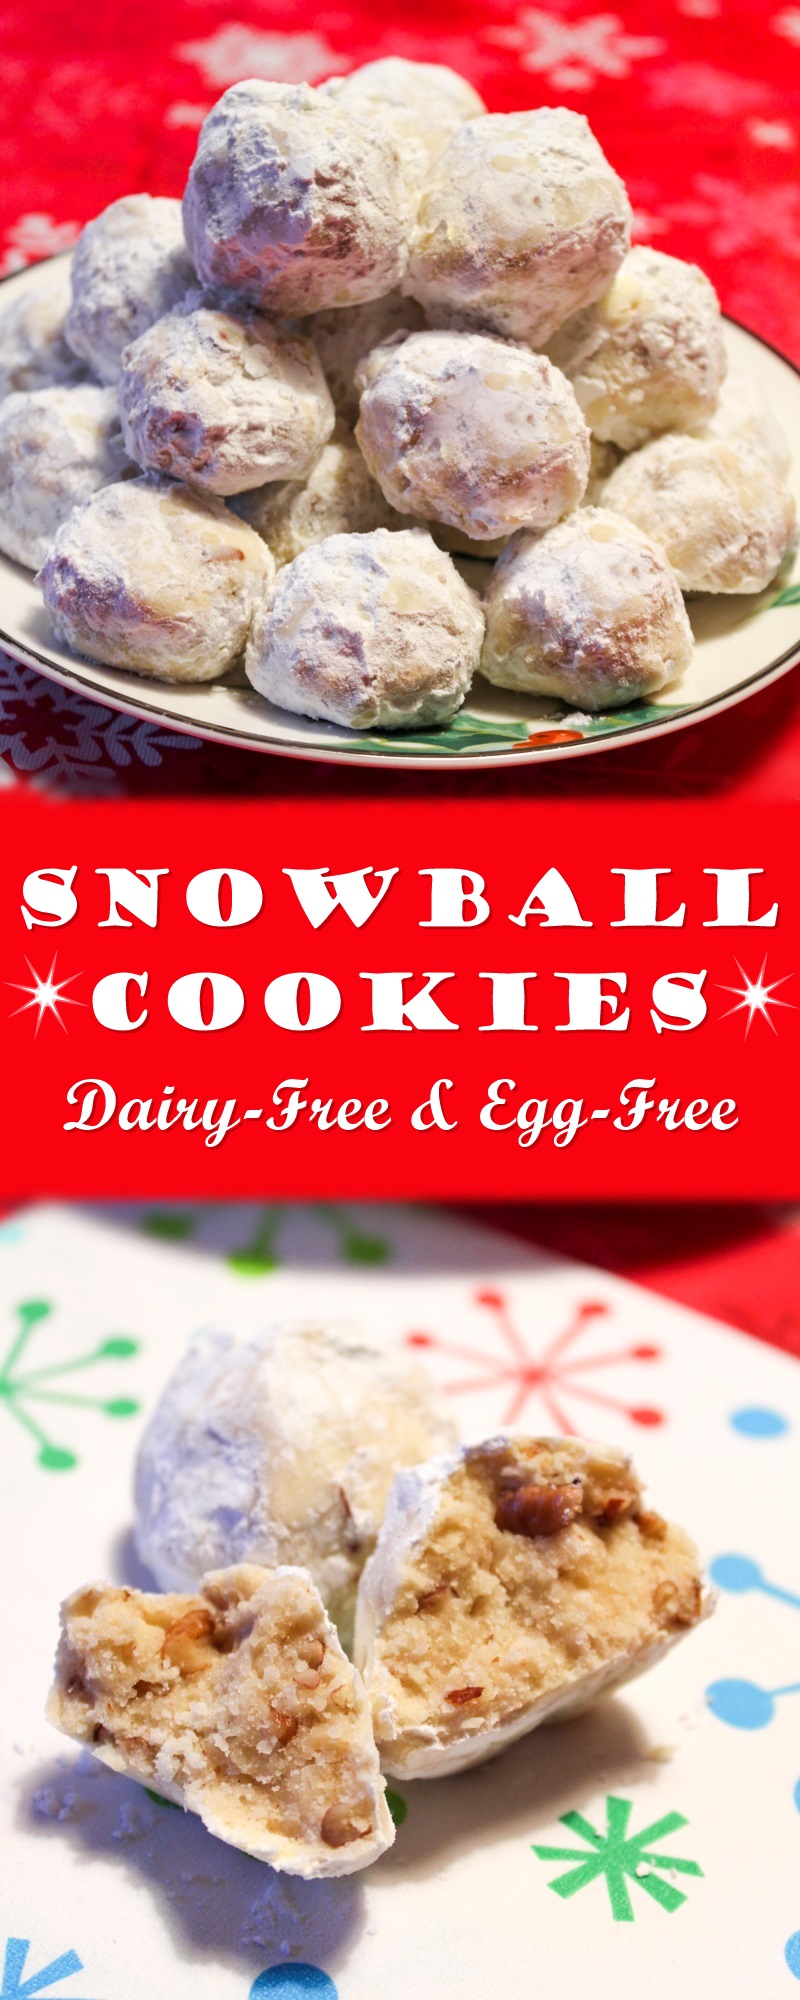 Vegan Snowball Cookies Recipe - dairy-free, egg-free, kids can cook treats (also known as Russian tea cakes)